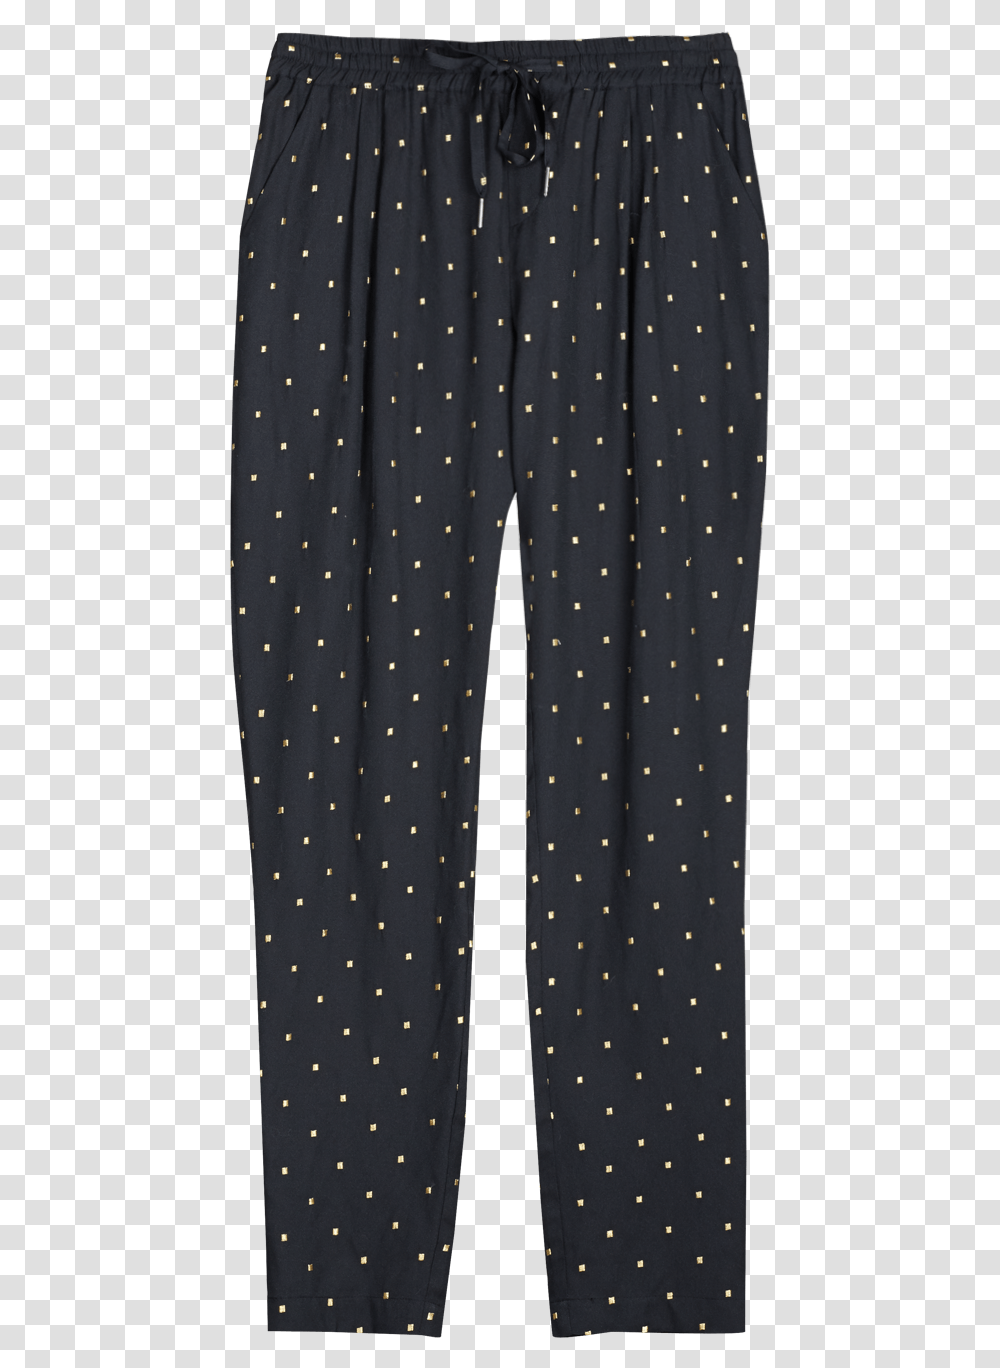 Awesome Joie Linser Pants With Gold Squares Pajamas, Texture, Polka Dot, Apparel Transparent Png